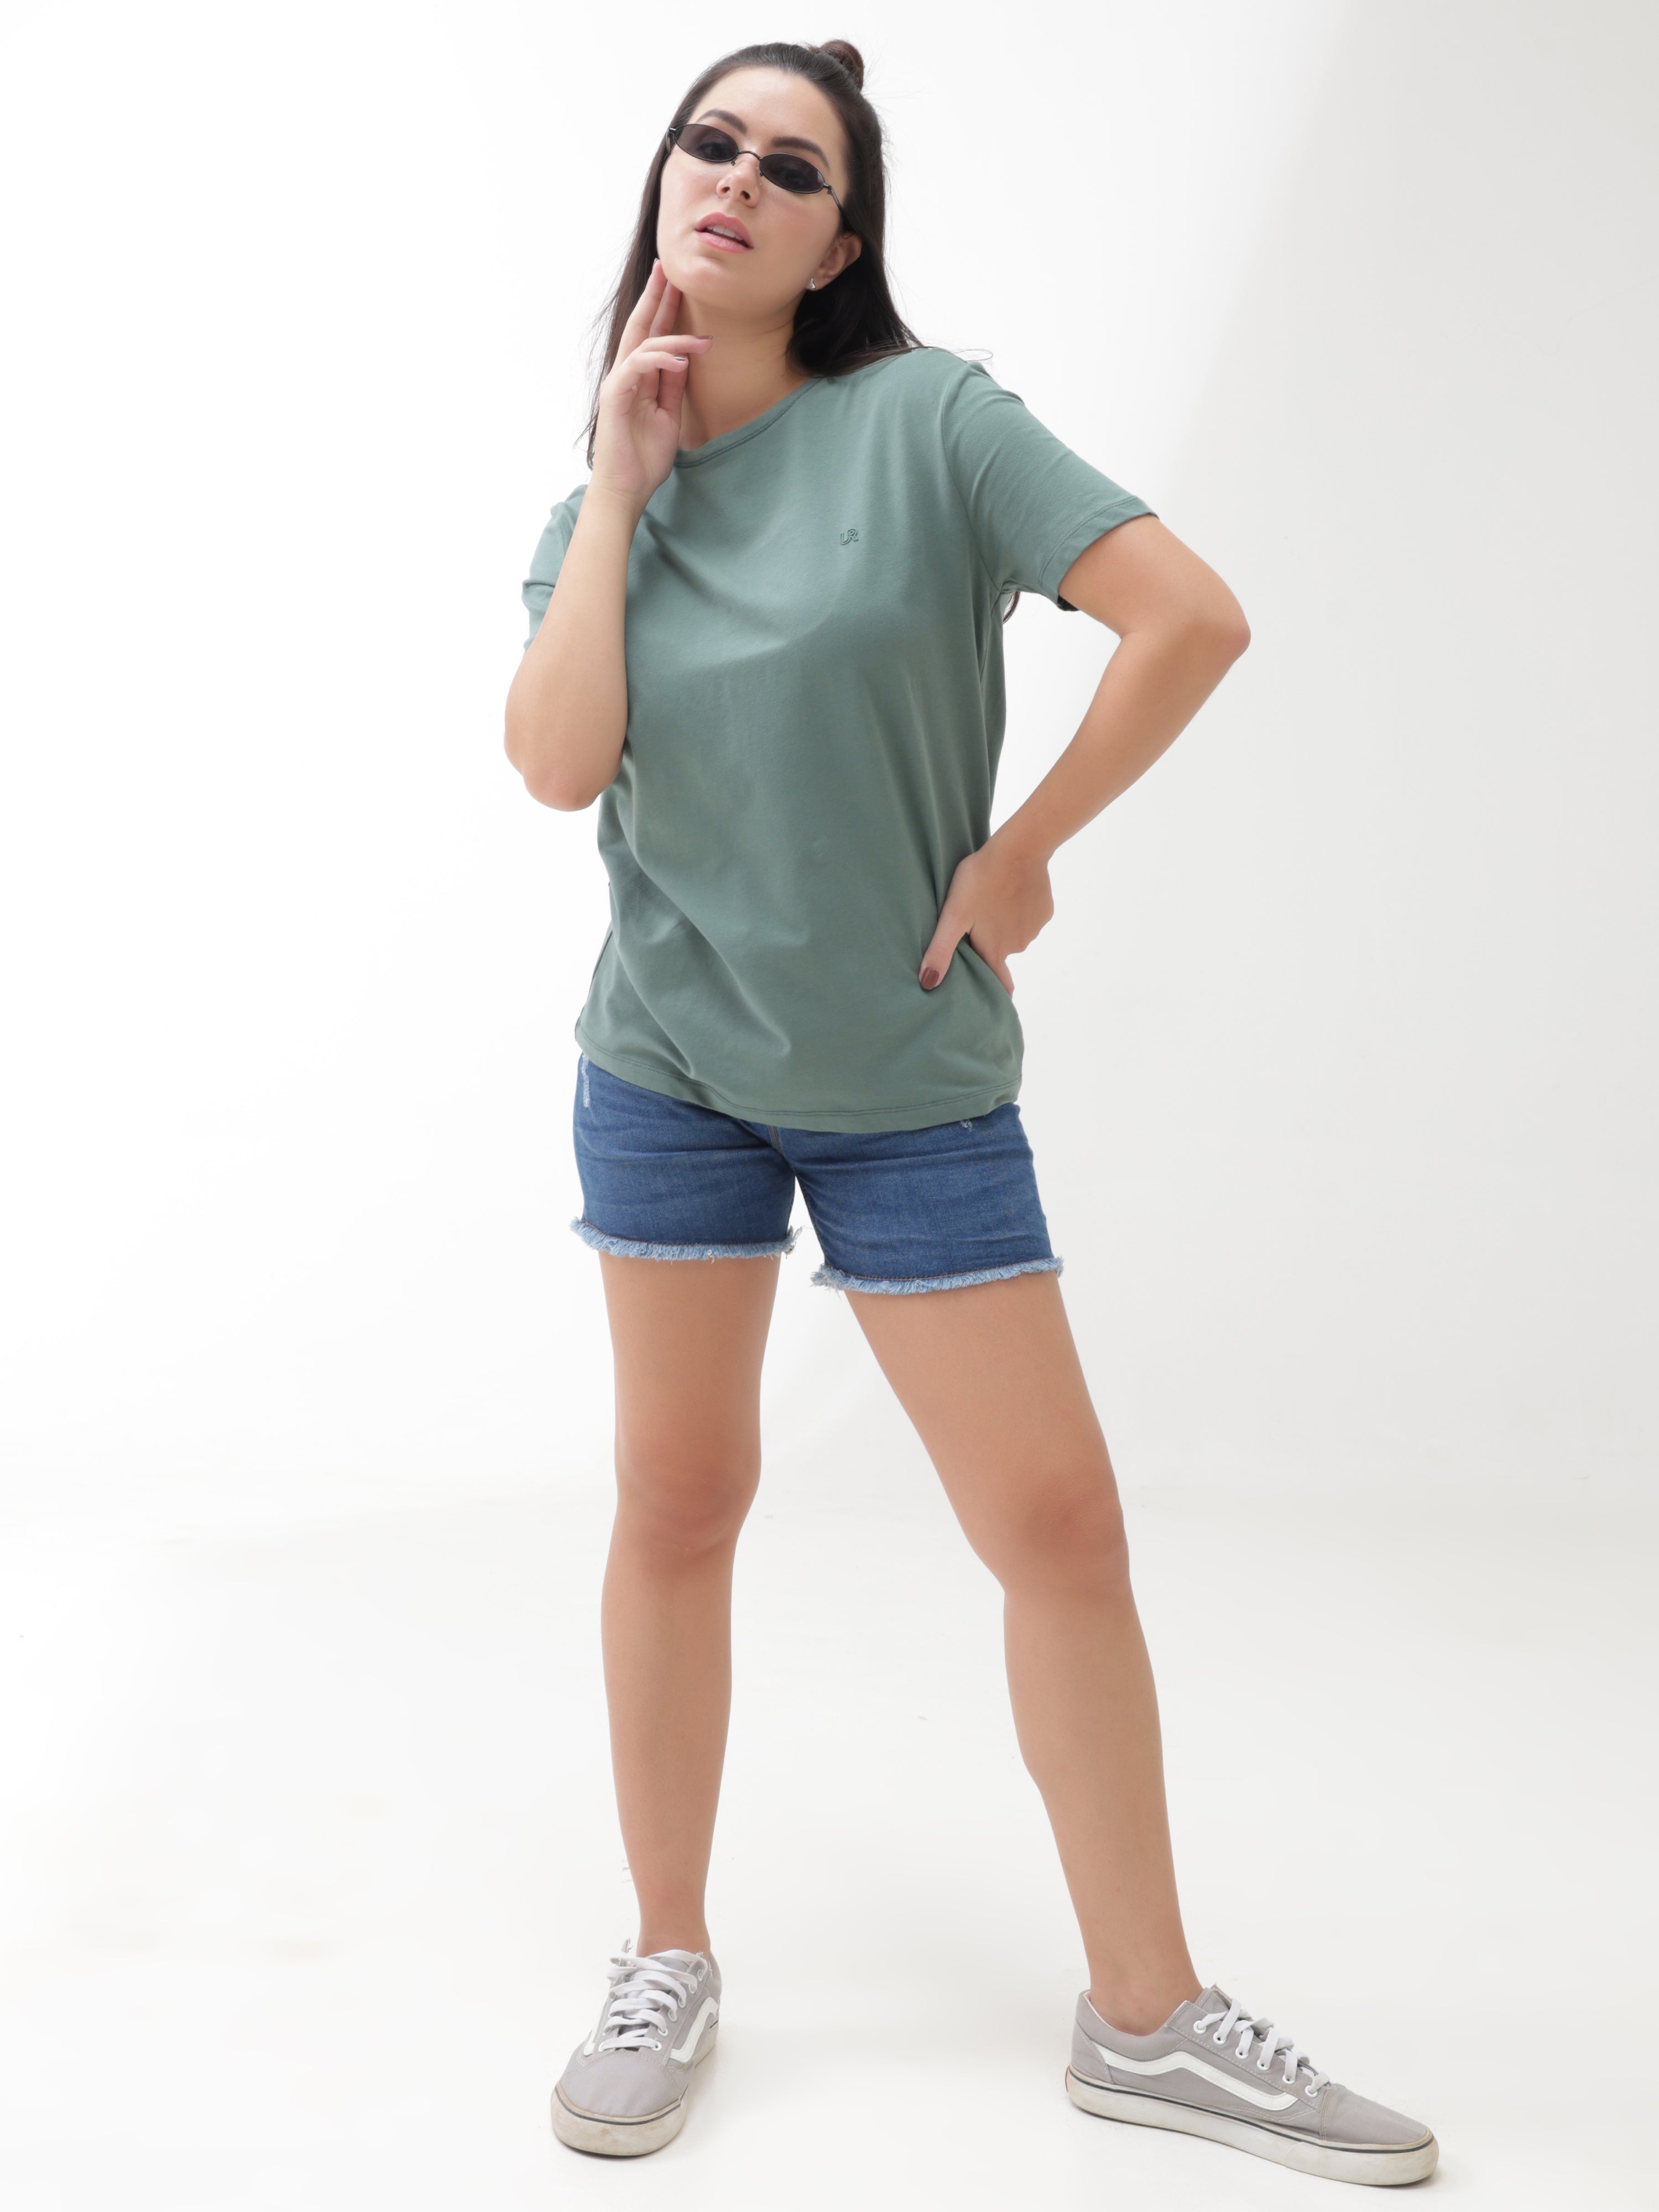 Woman wearing a simple green round neck t-shirt paired with denim shorts and casual sneakers